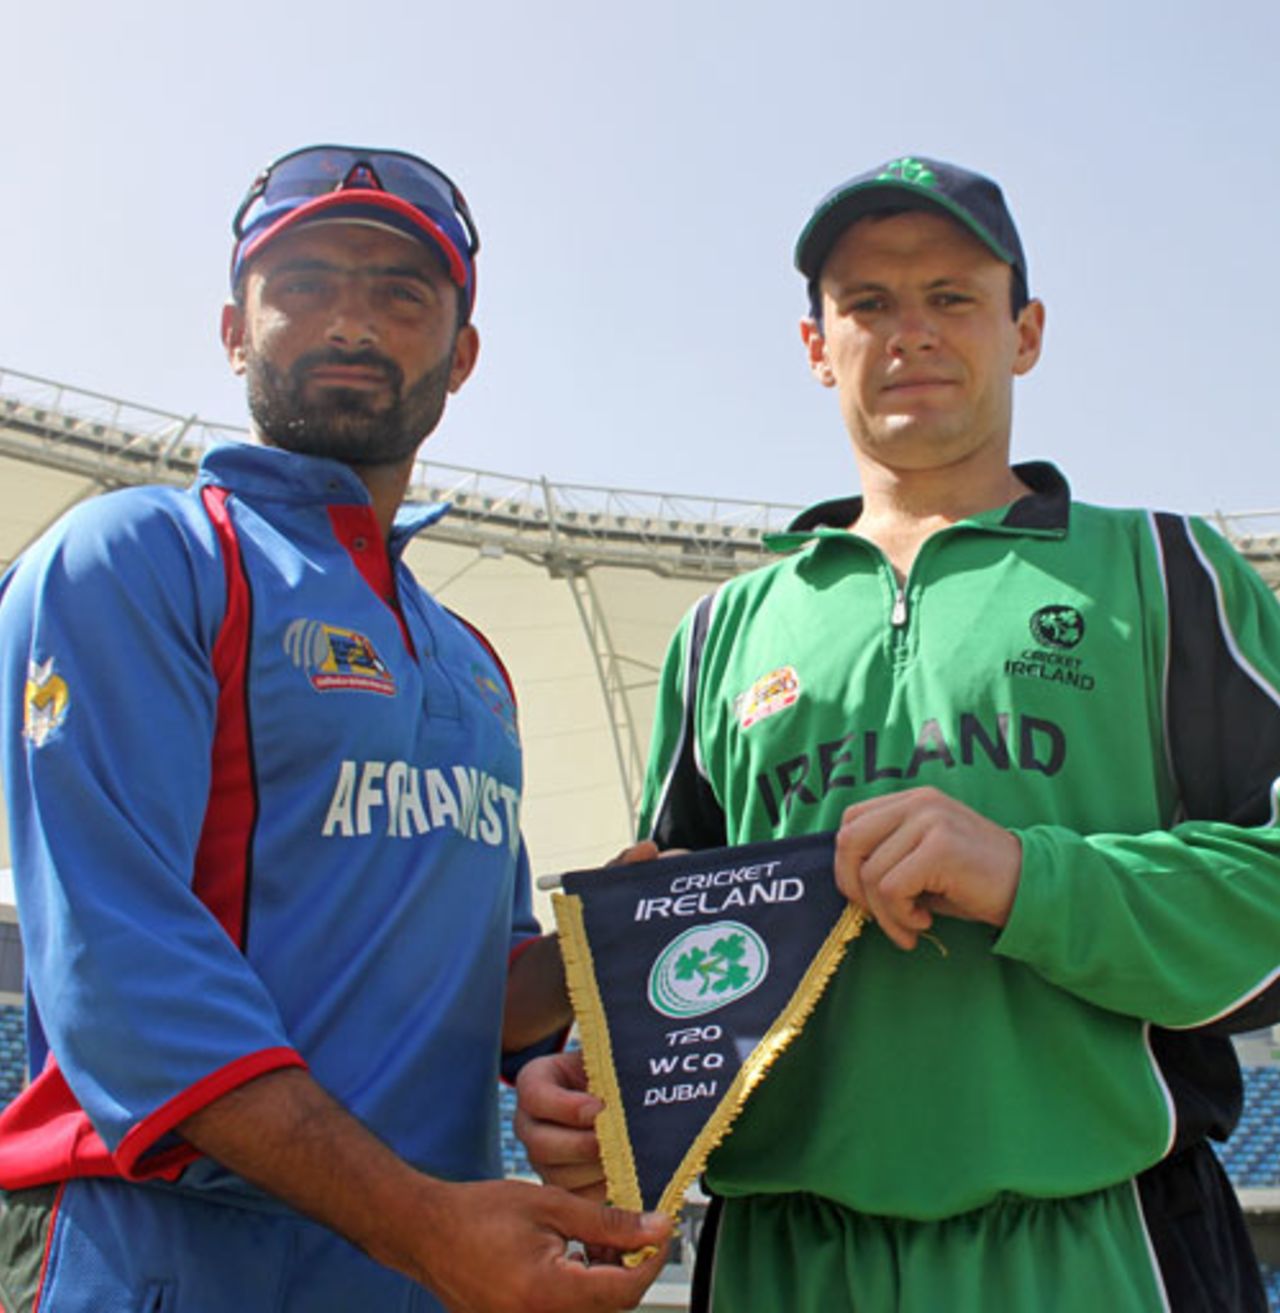 Nowroz Mangal receives a pendant from William Porterfield ahead of the game between their two teams, Afghanistan v Ireland, ICC World Twenty20 Qualifiers, February 9, 2010